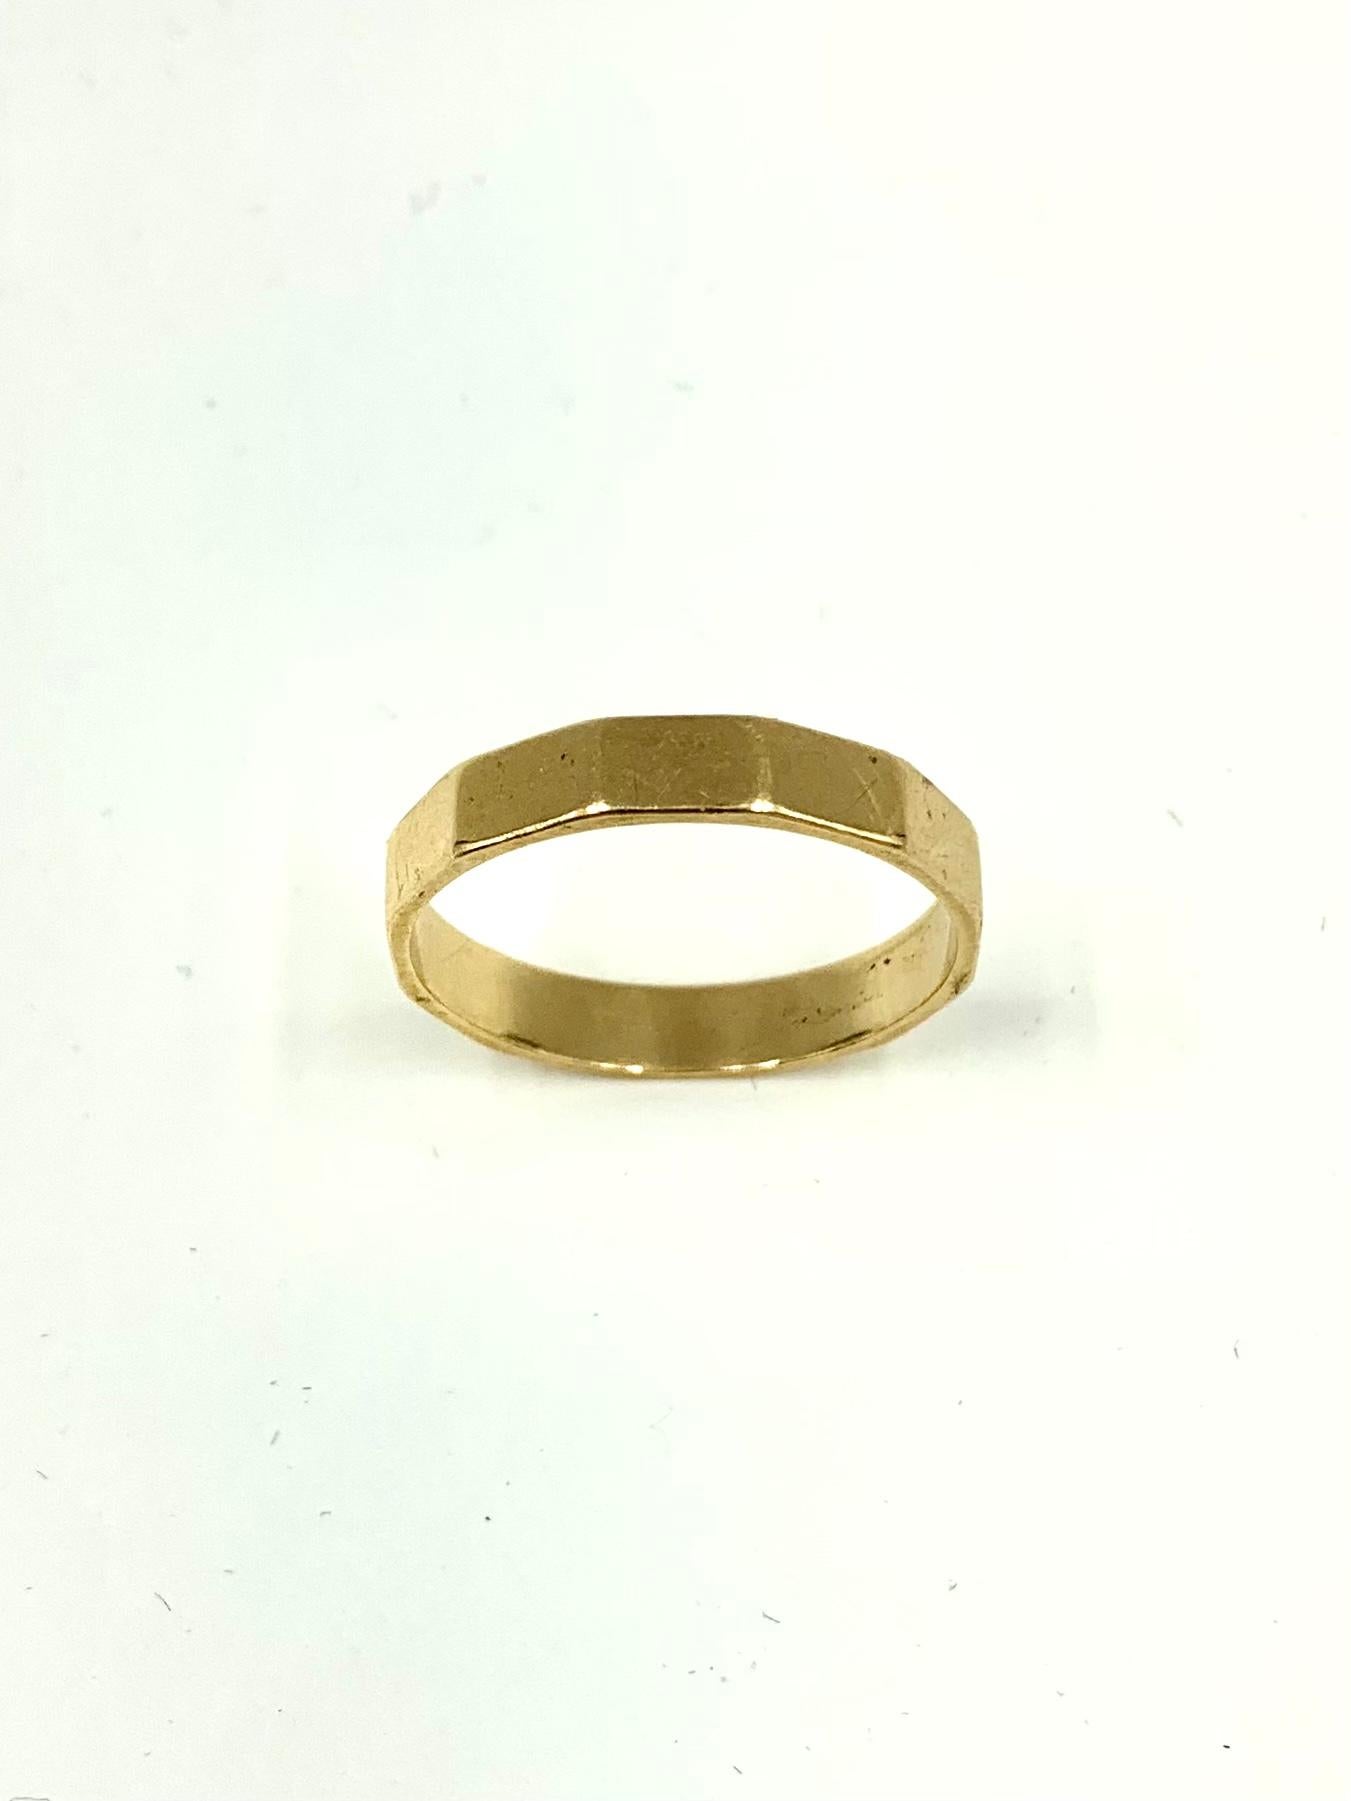 Vintage 1960s Modernist Dodecagon 14k Yellow Gold Band Rind For Sale 2